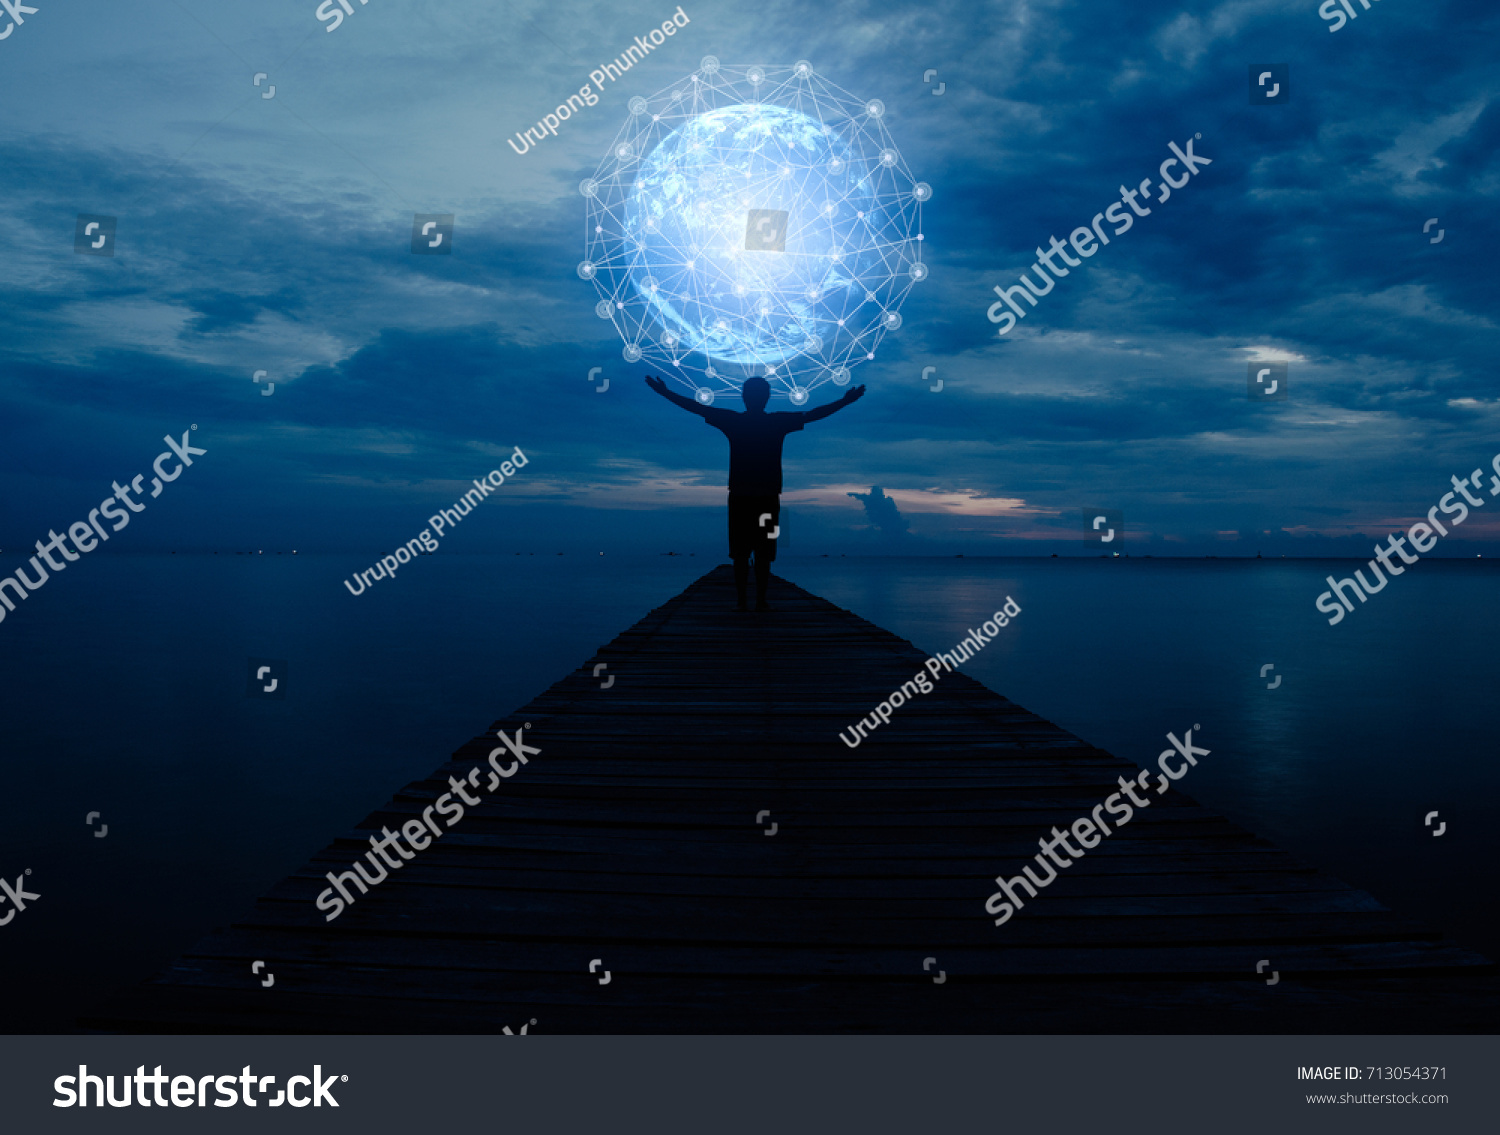 Abstract science, circle global network connection in hands on night sky background / soft focus picture / Blue tone concept #713054371